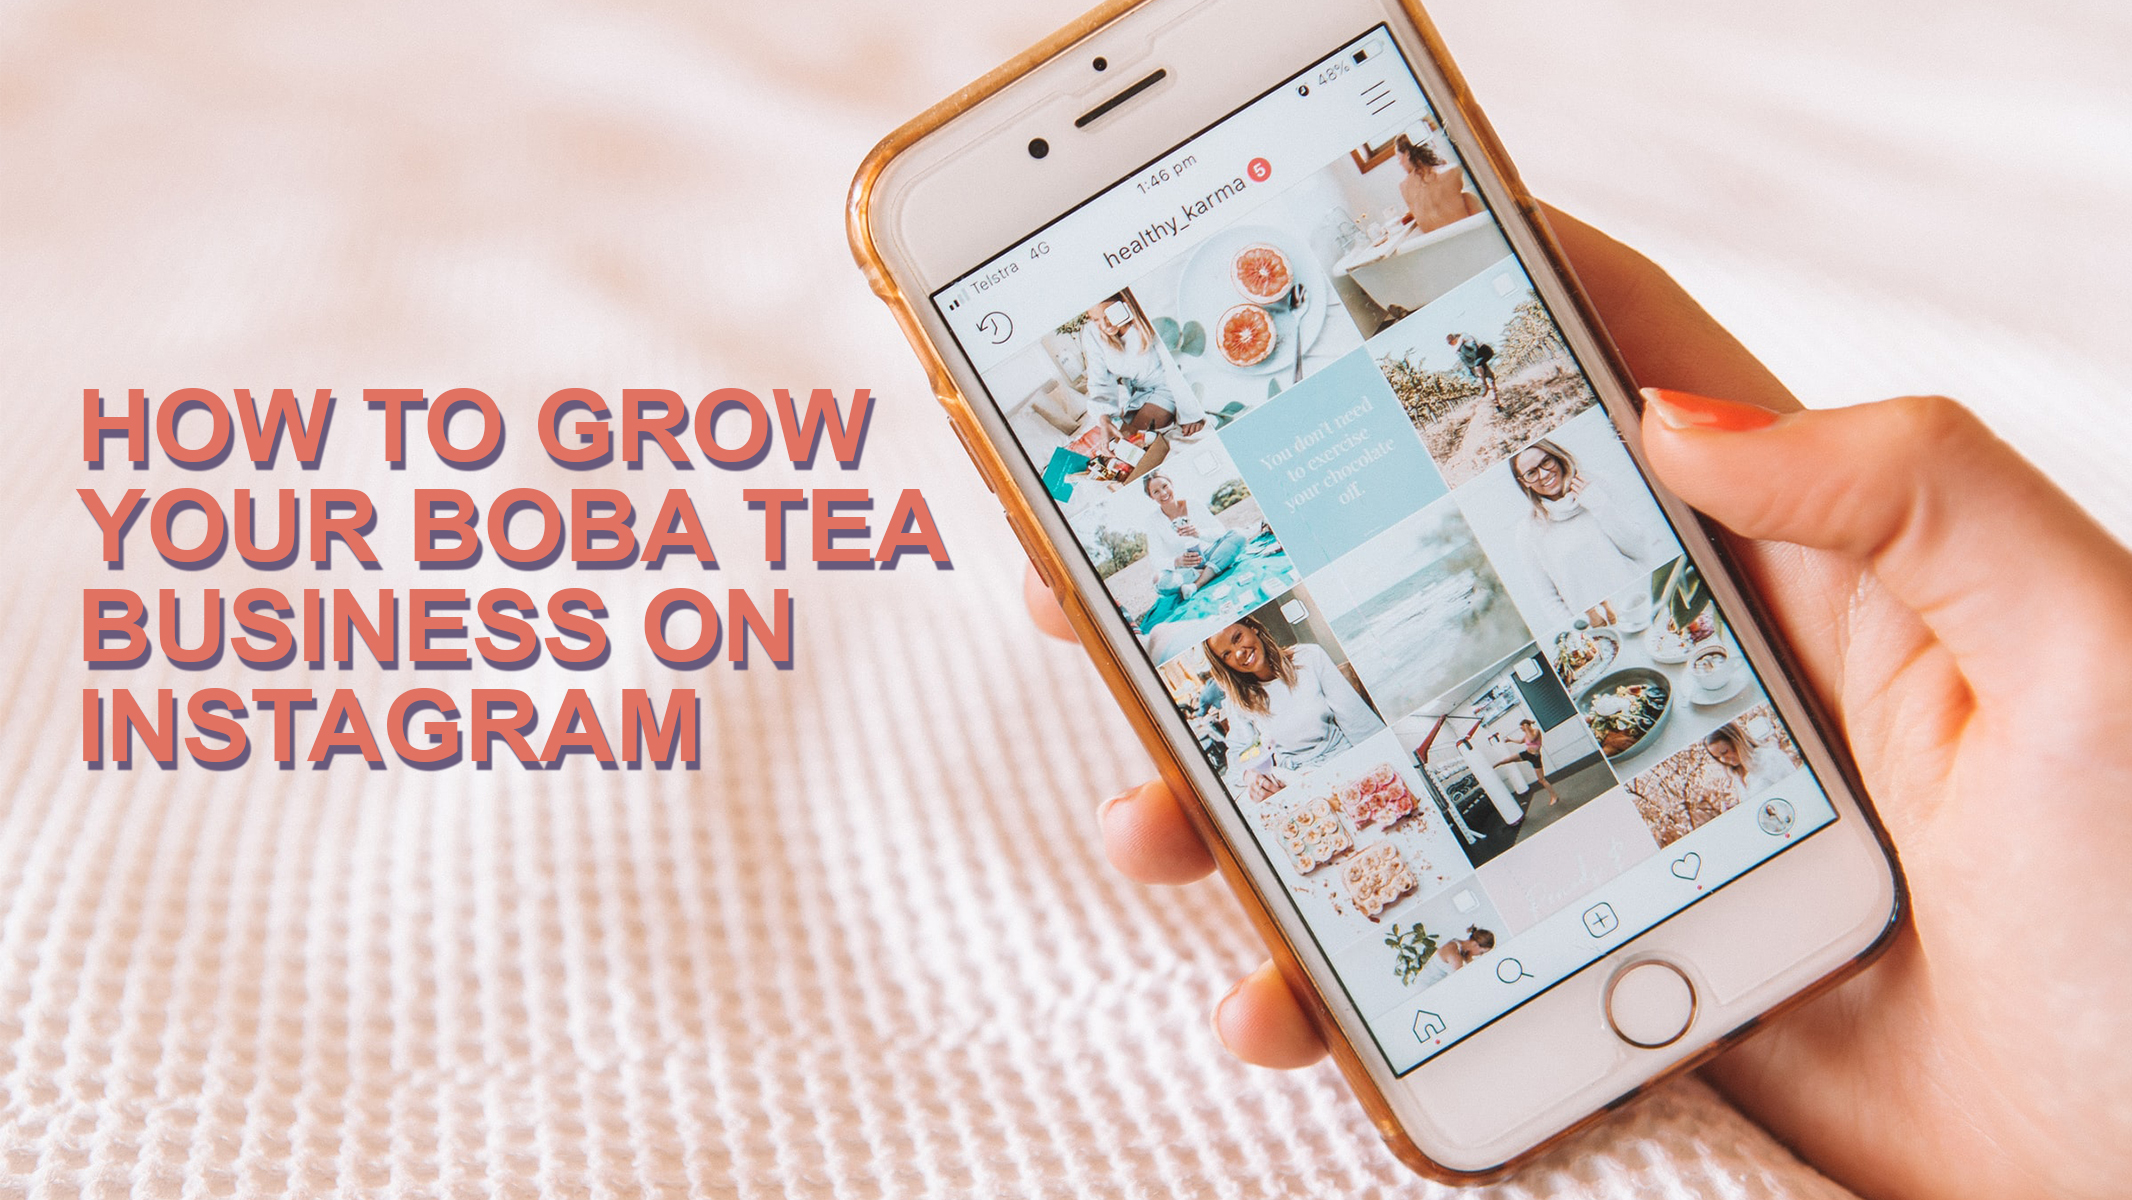 How to Grow Your Boba Tea Business on Instagram